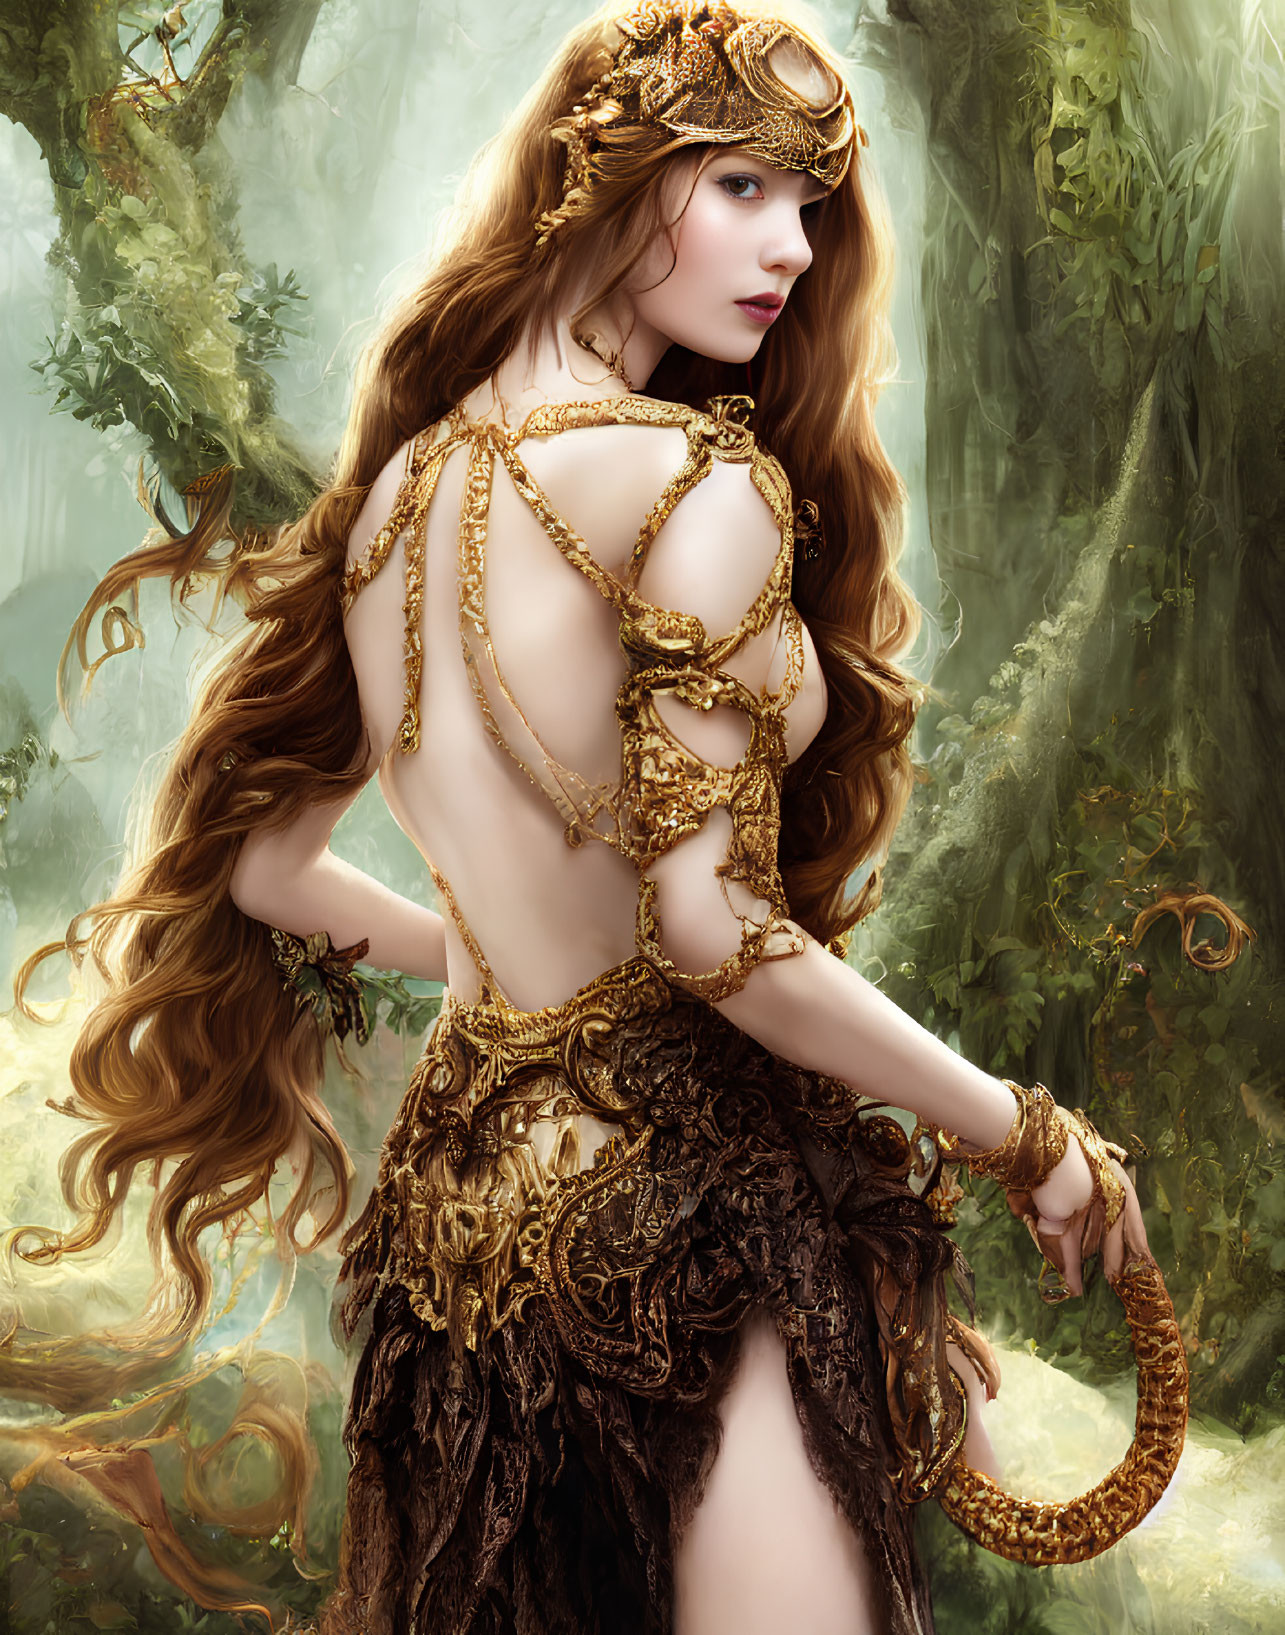 Fantasy woman with long hair, golden jewelry, brown outfit, and snake in forest